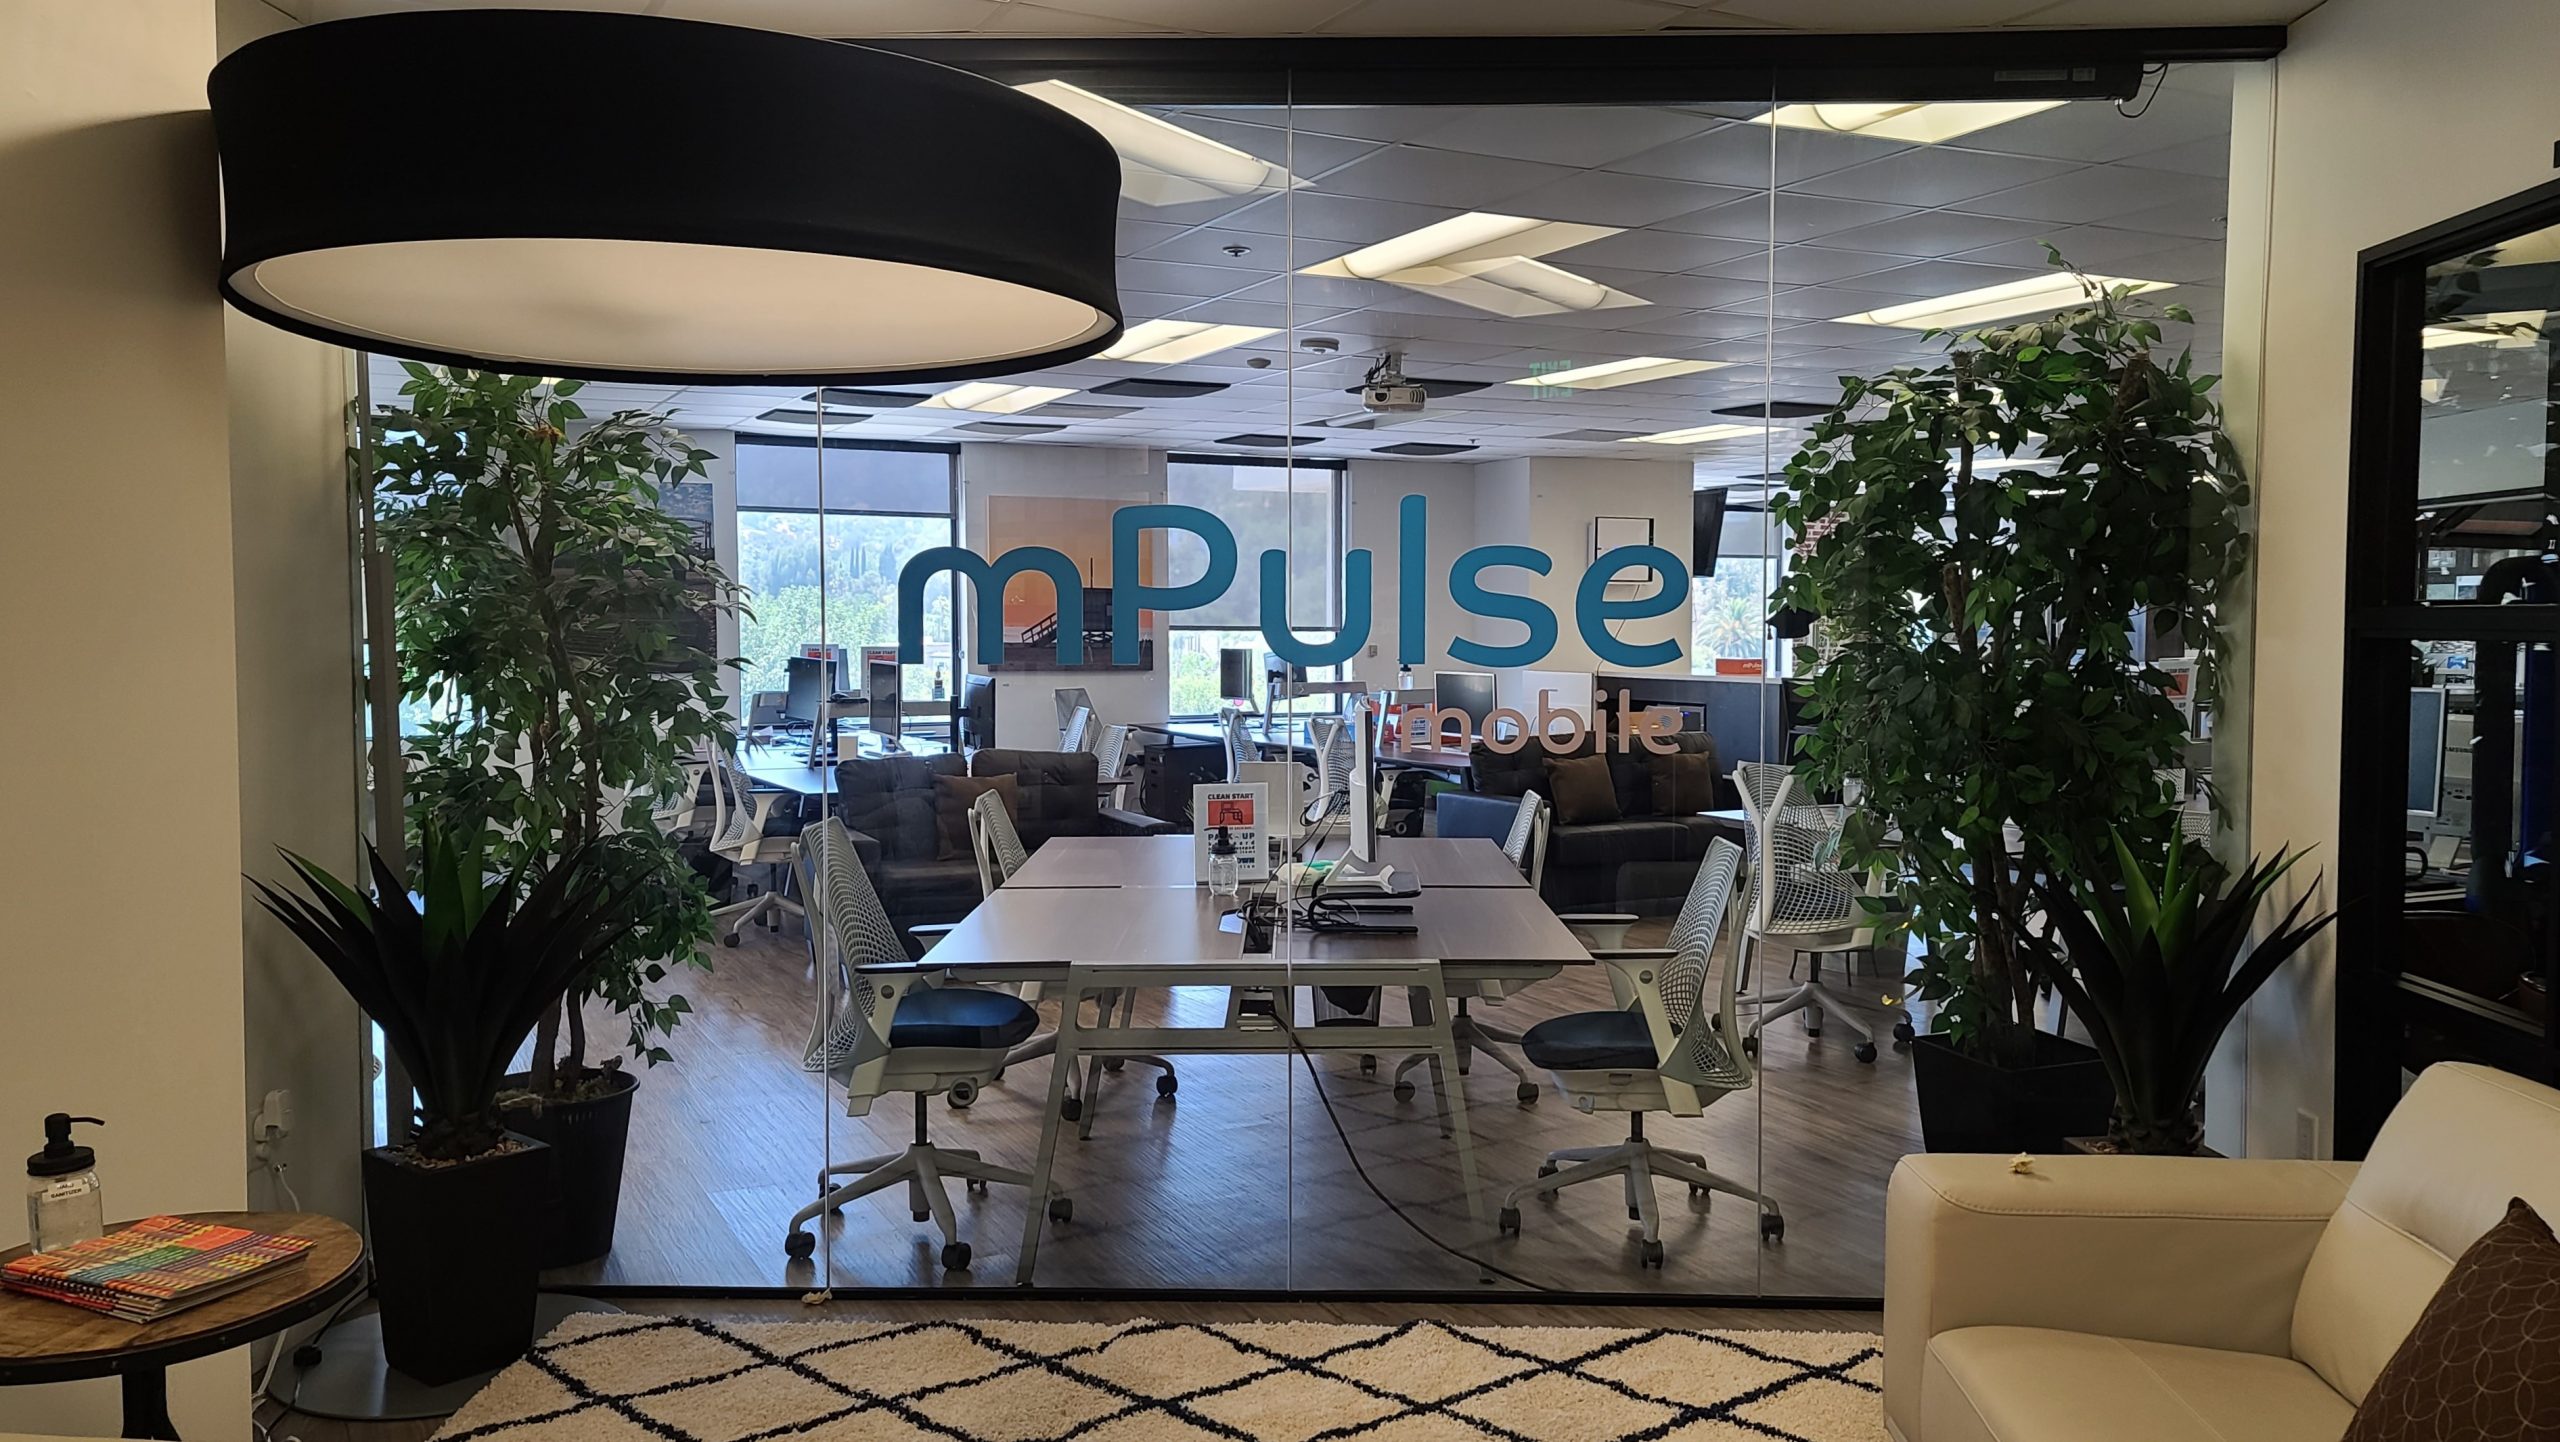 You are currently viewing Office Window Graphics for mPulse Mobile in Encino